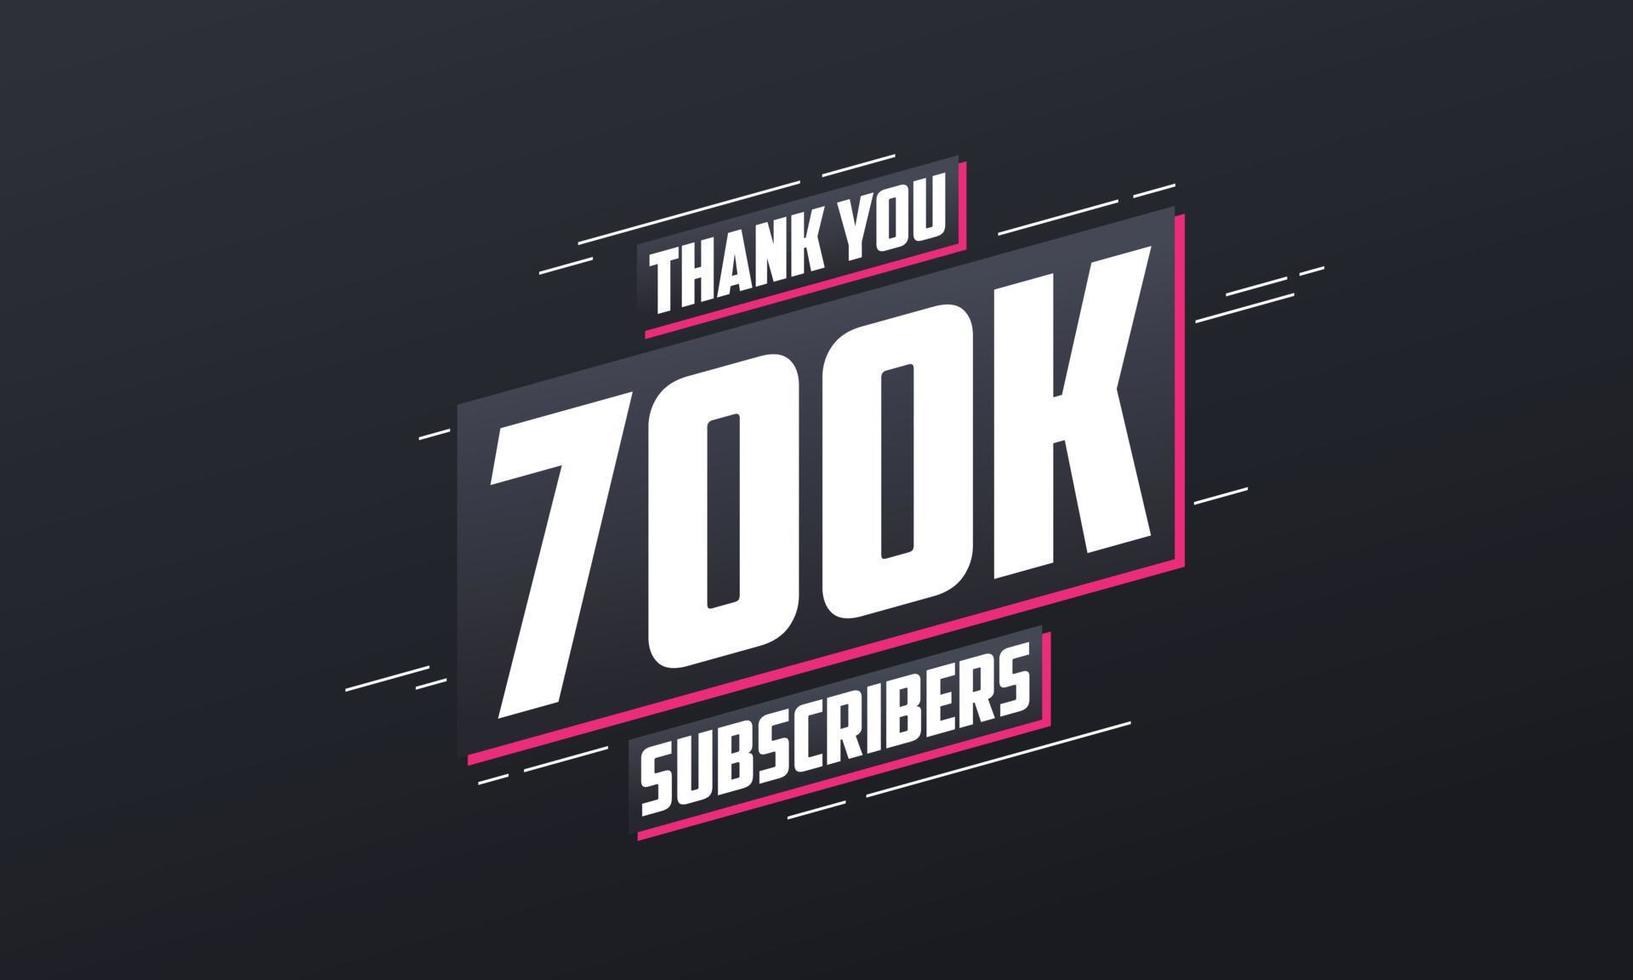 Thank you 700000 subscribers 700k subscribers celebration. vector